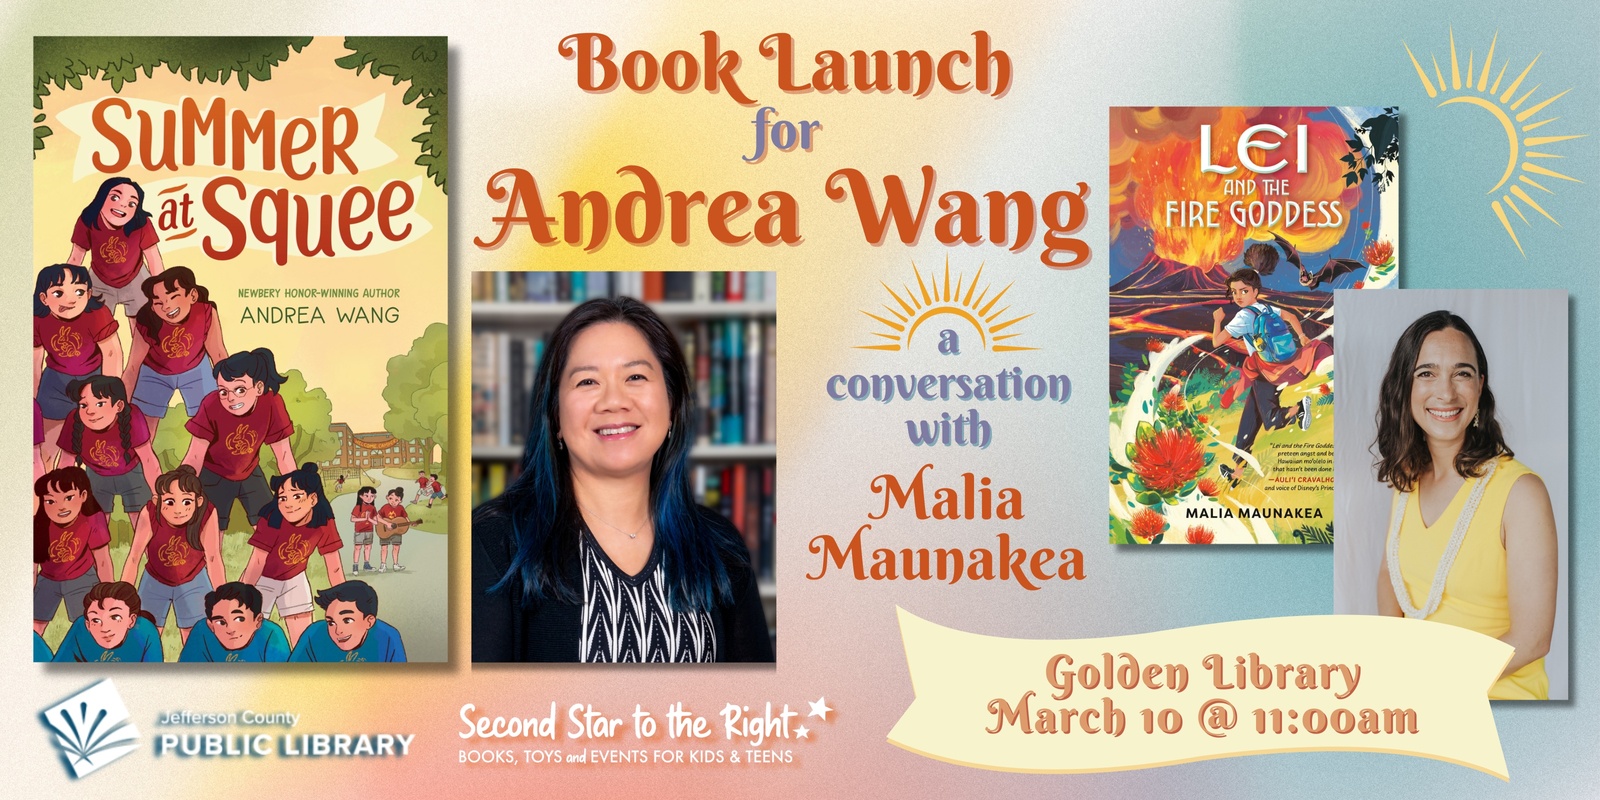 Banner image for Book Launch for Andrea Wang (a conversation with Malia Maunakea)